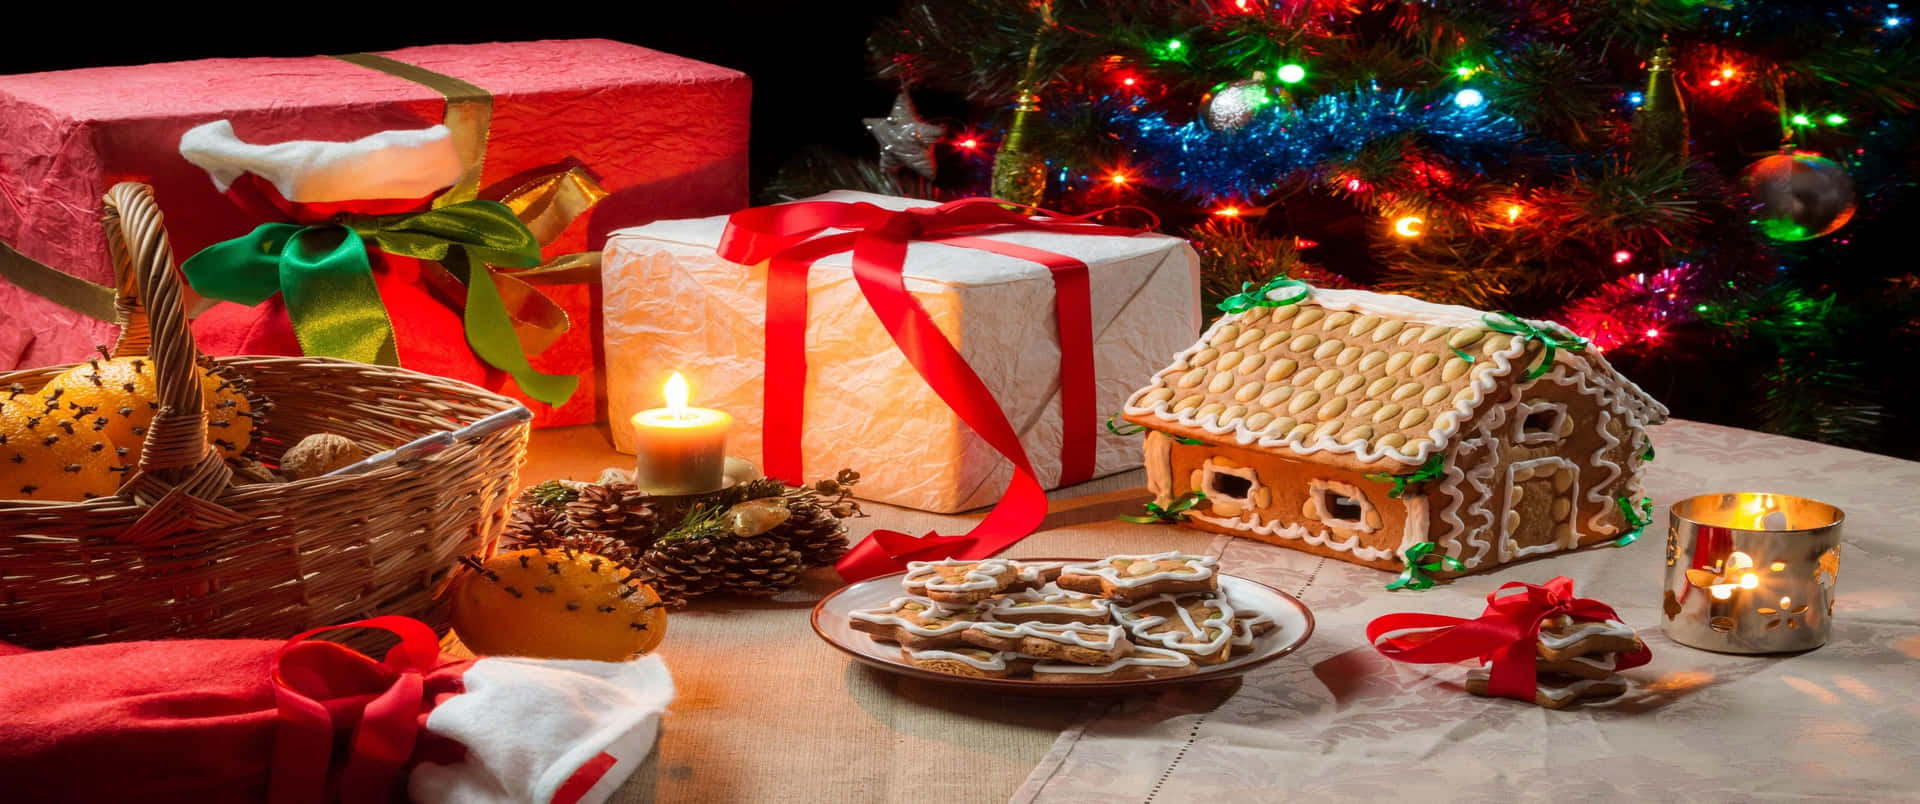 Christmas Baked Snack 3440x1440p Cookies Background